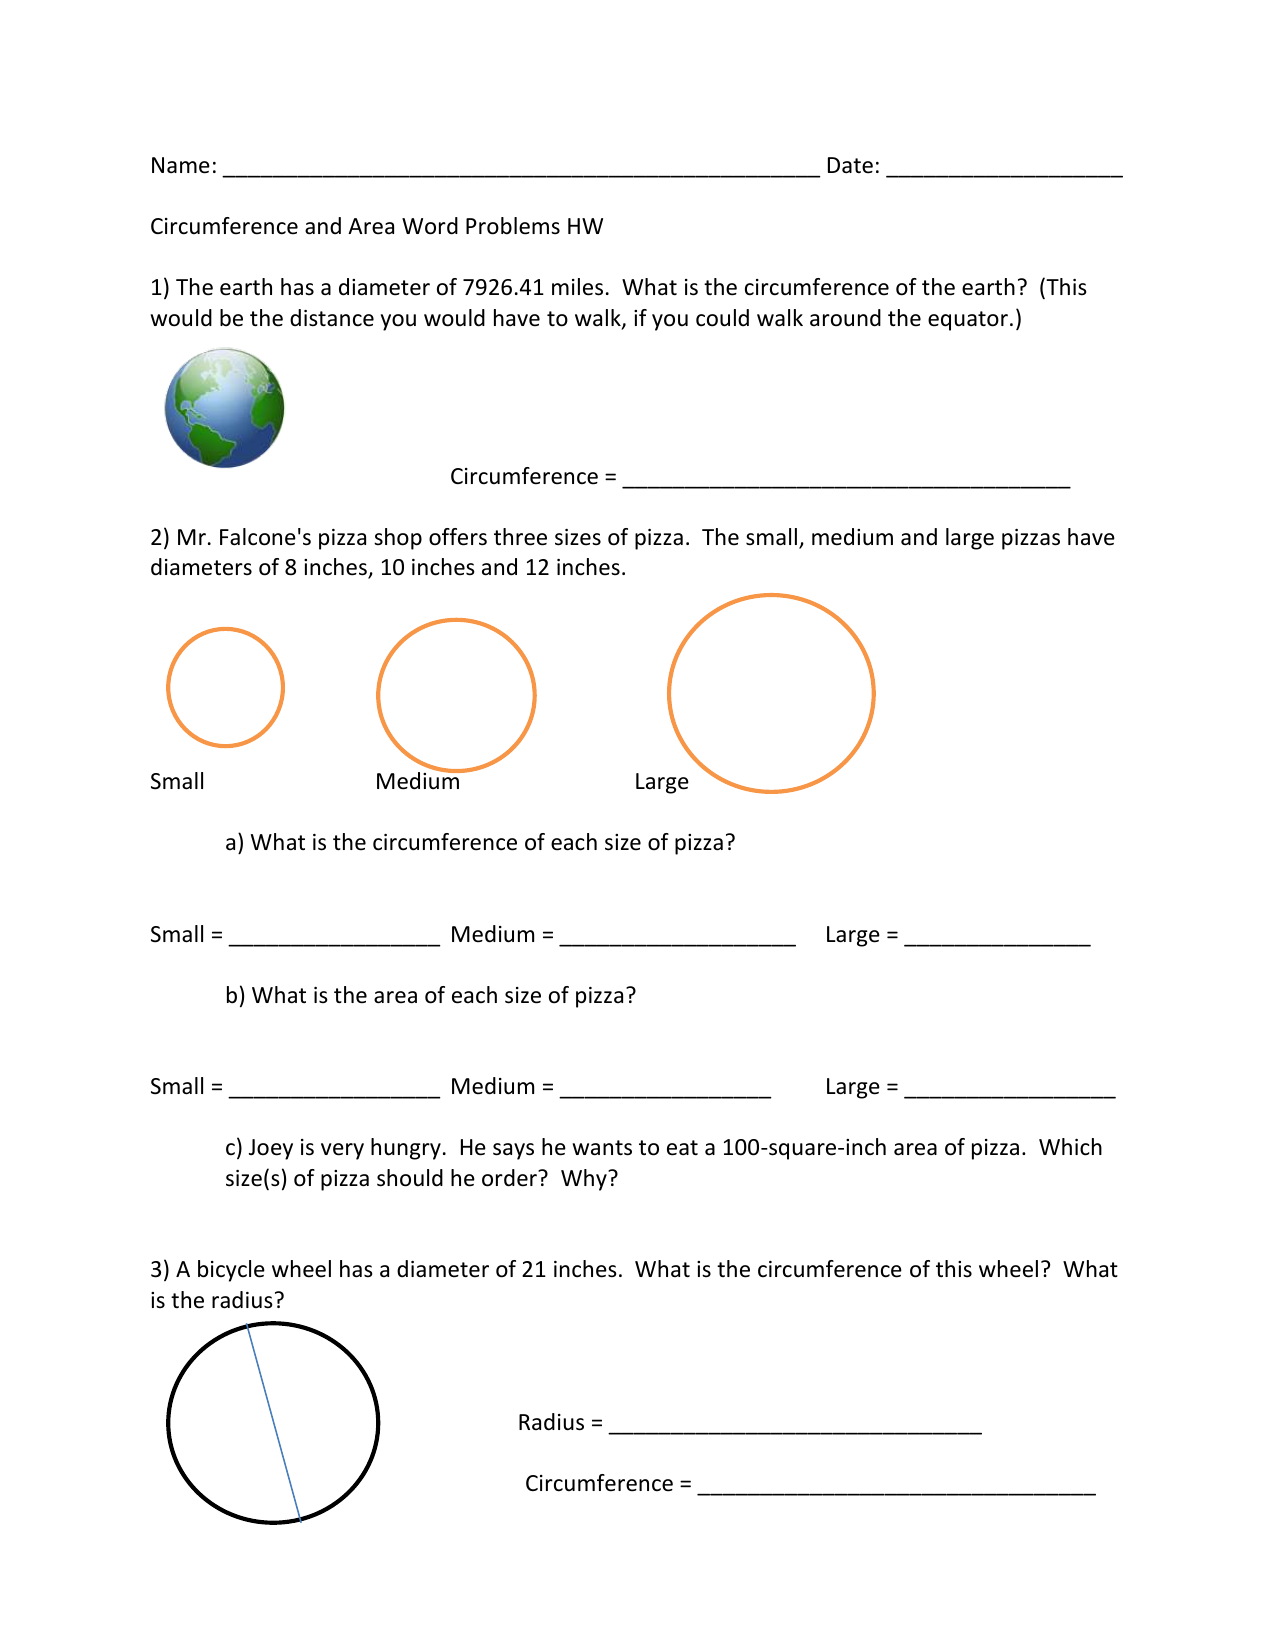 circumference-and-area-word-problems-hw-2